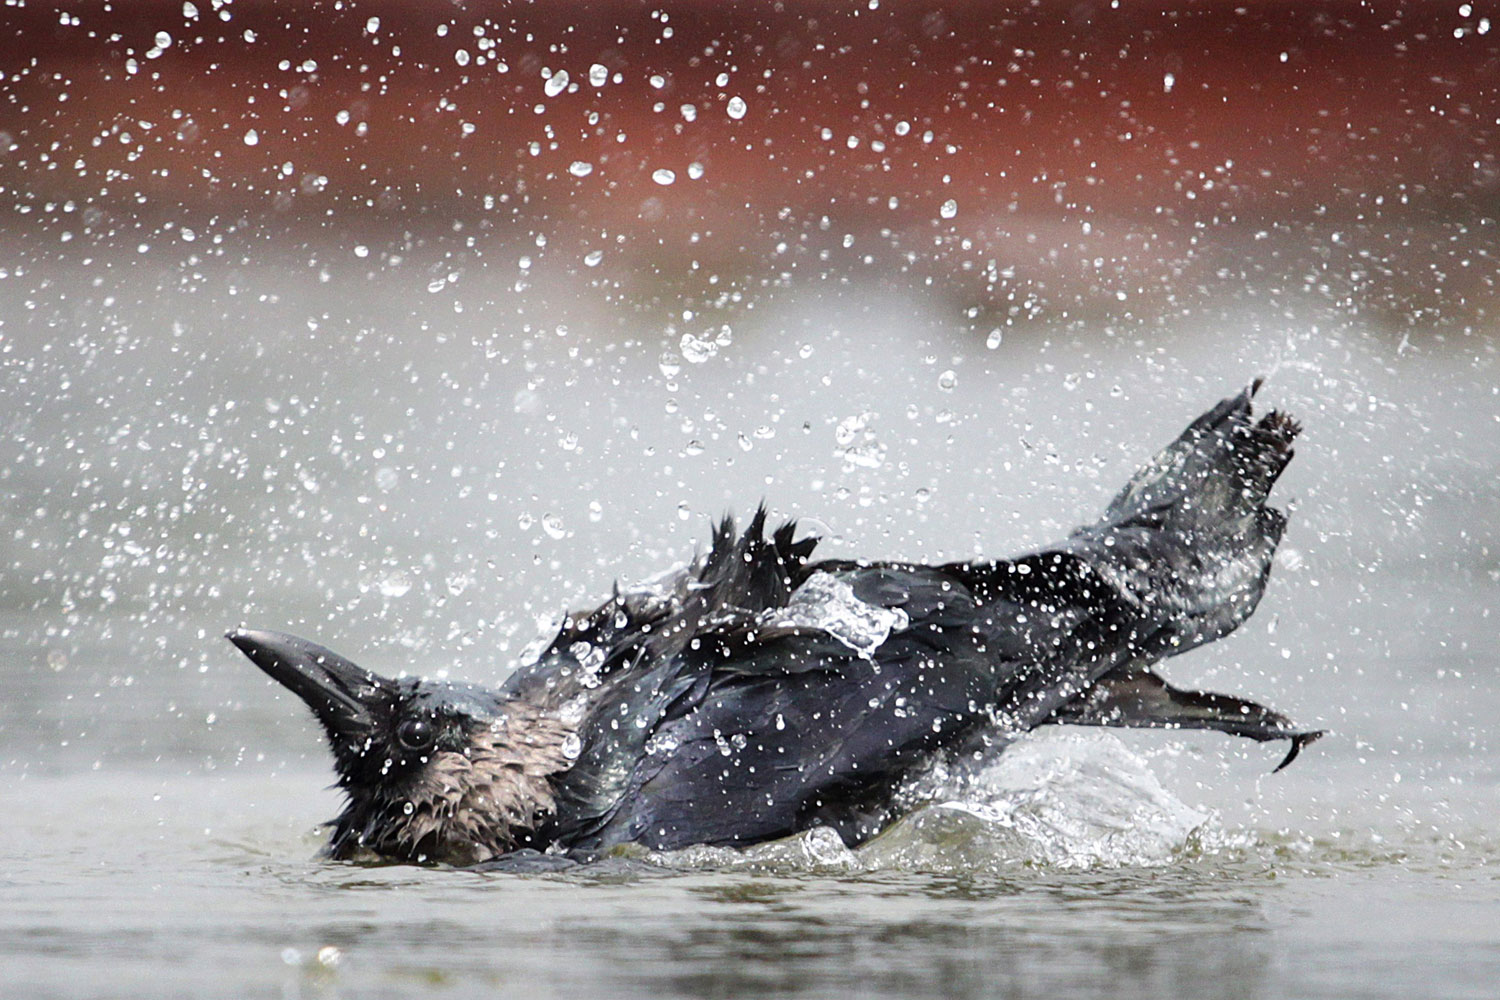 A crow splashes in a water pond during rains near the Indian president house in New Delhi, India, July 9, 2011.